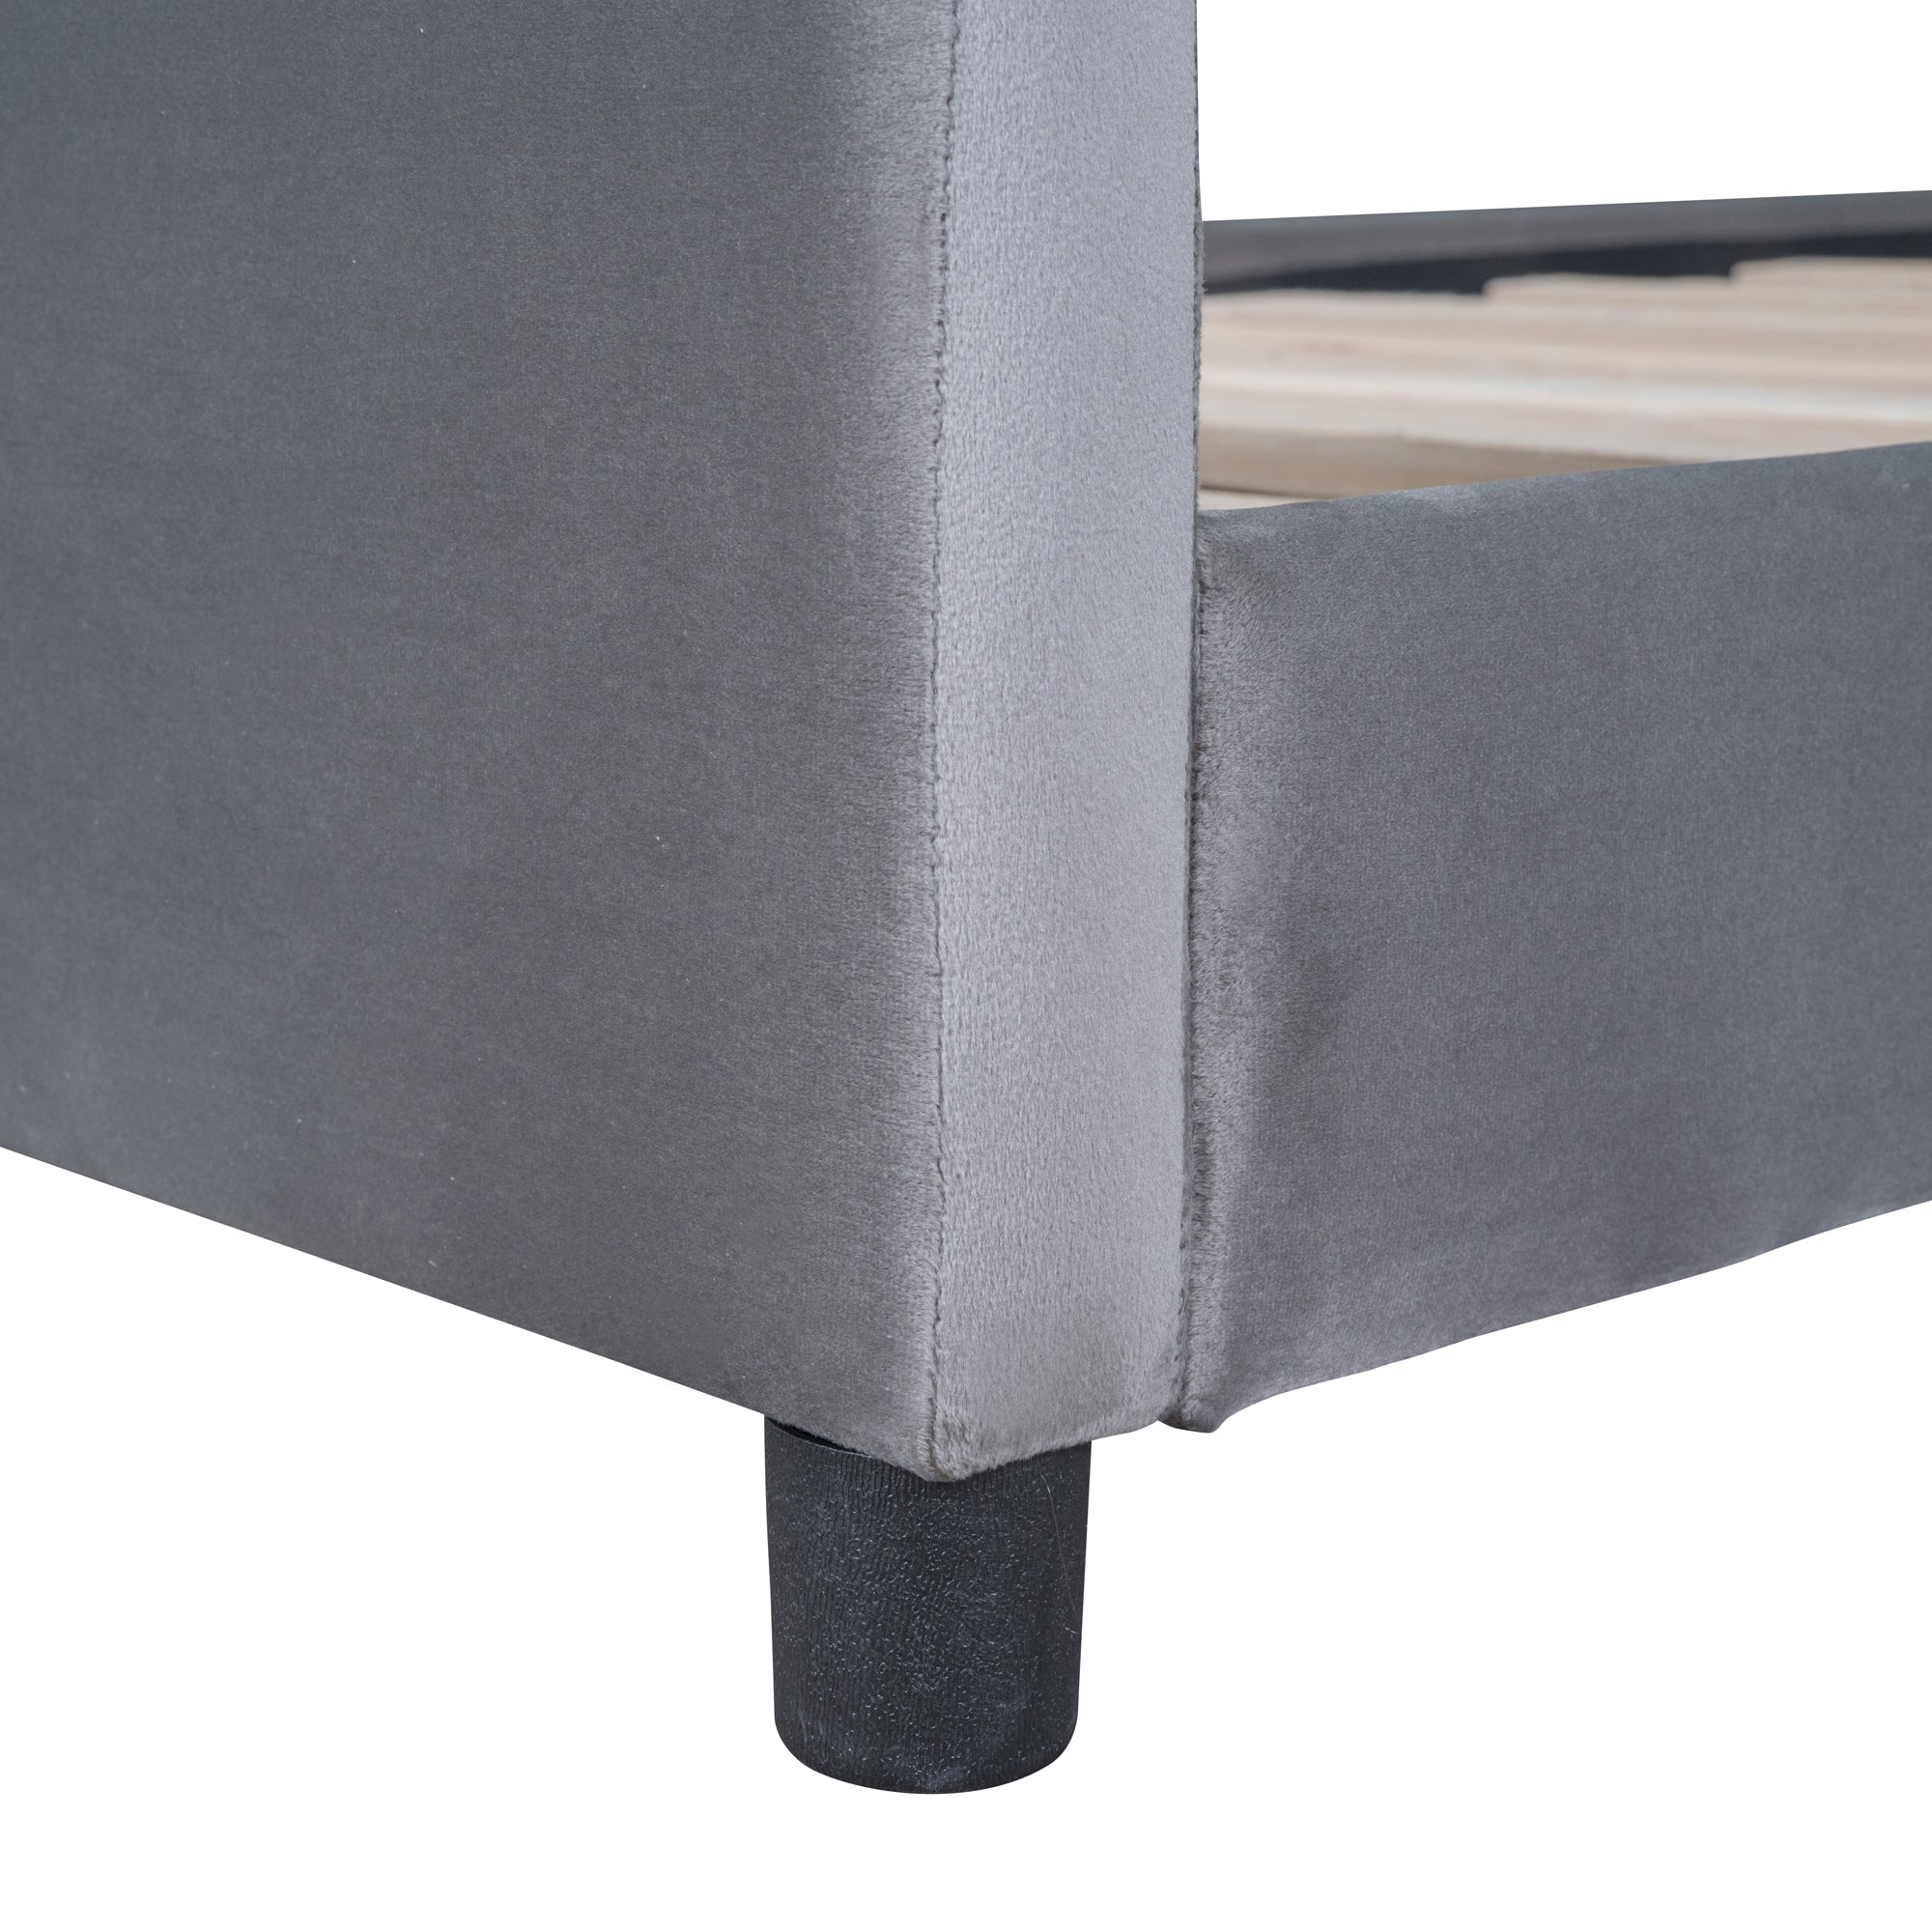 Twin Size Upholstered Daybed with Rabbit Ear Shaped gray-velvet